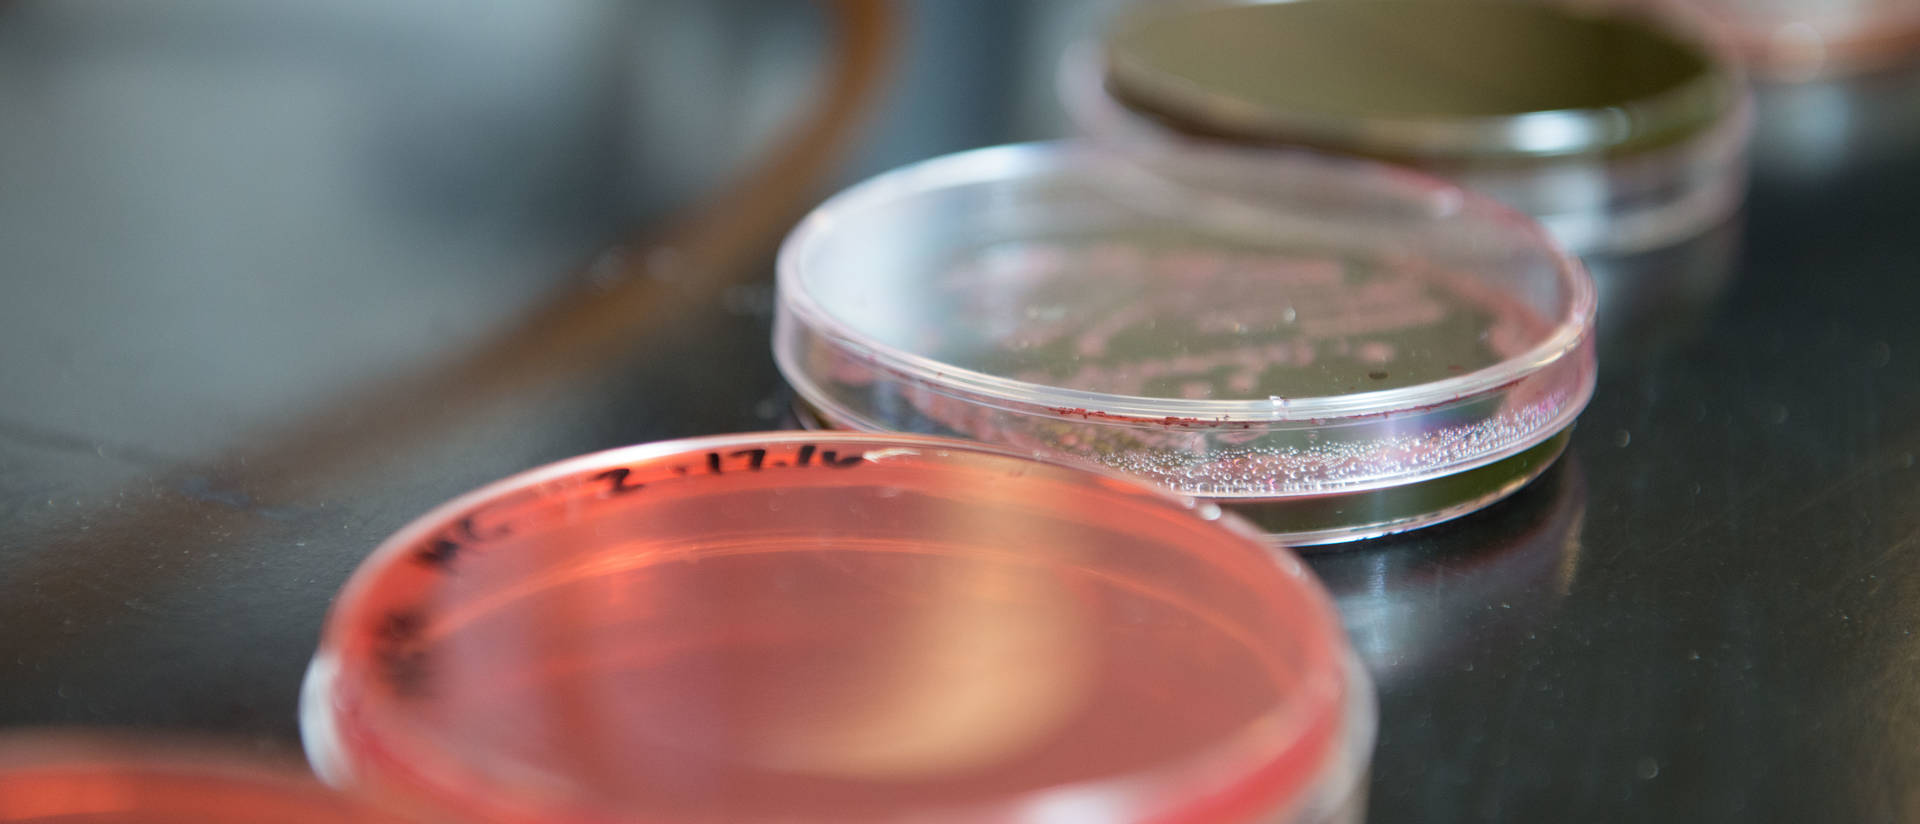 Photo of petri dishes being used in a lab